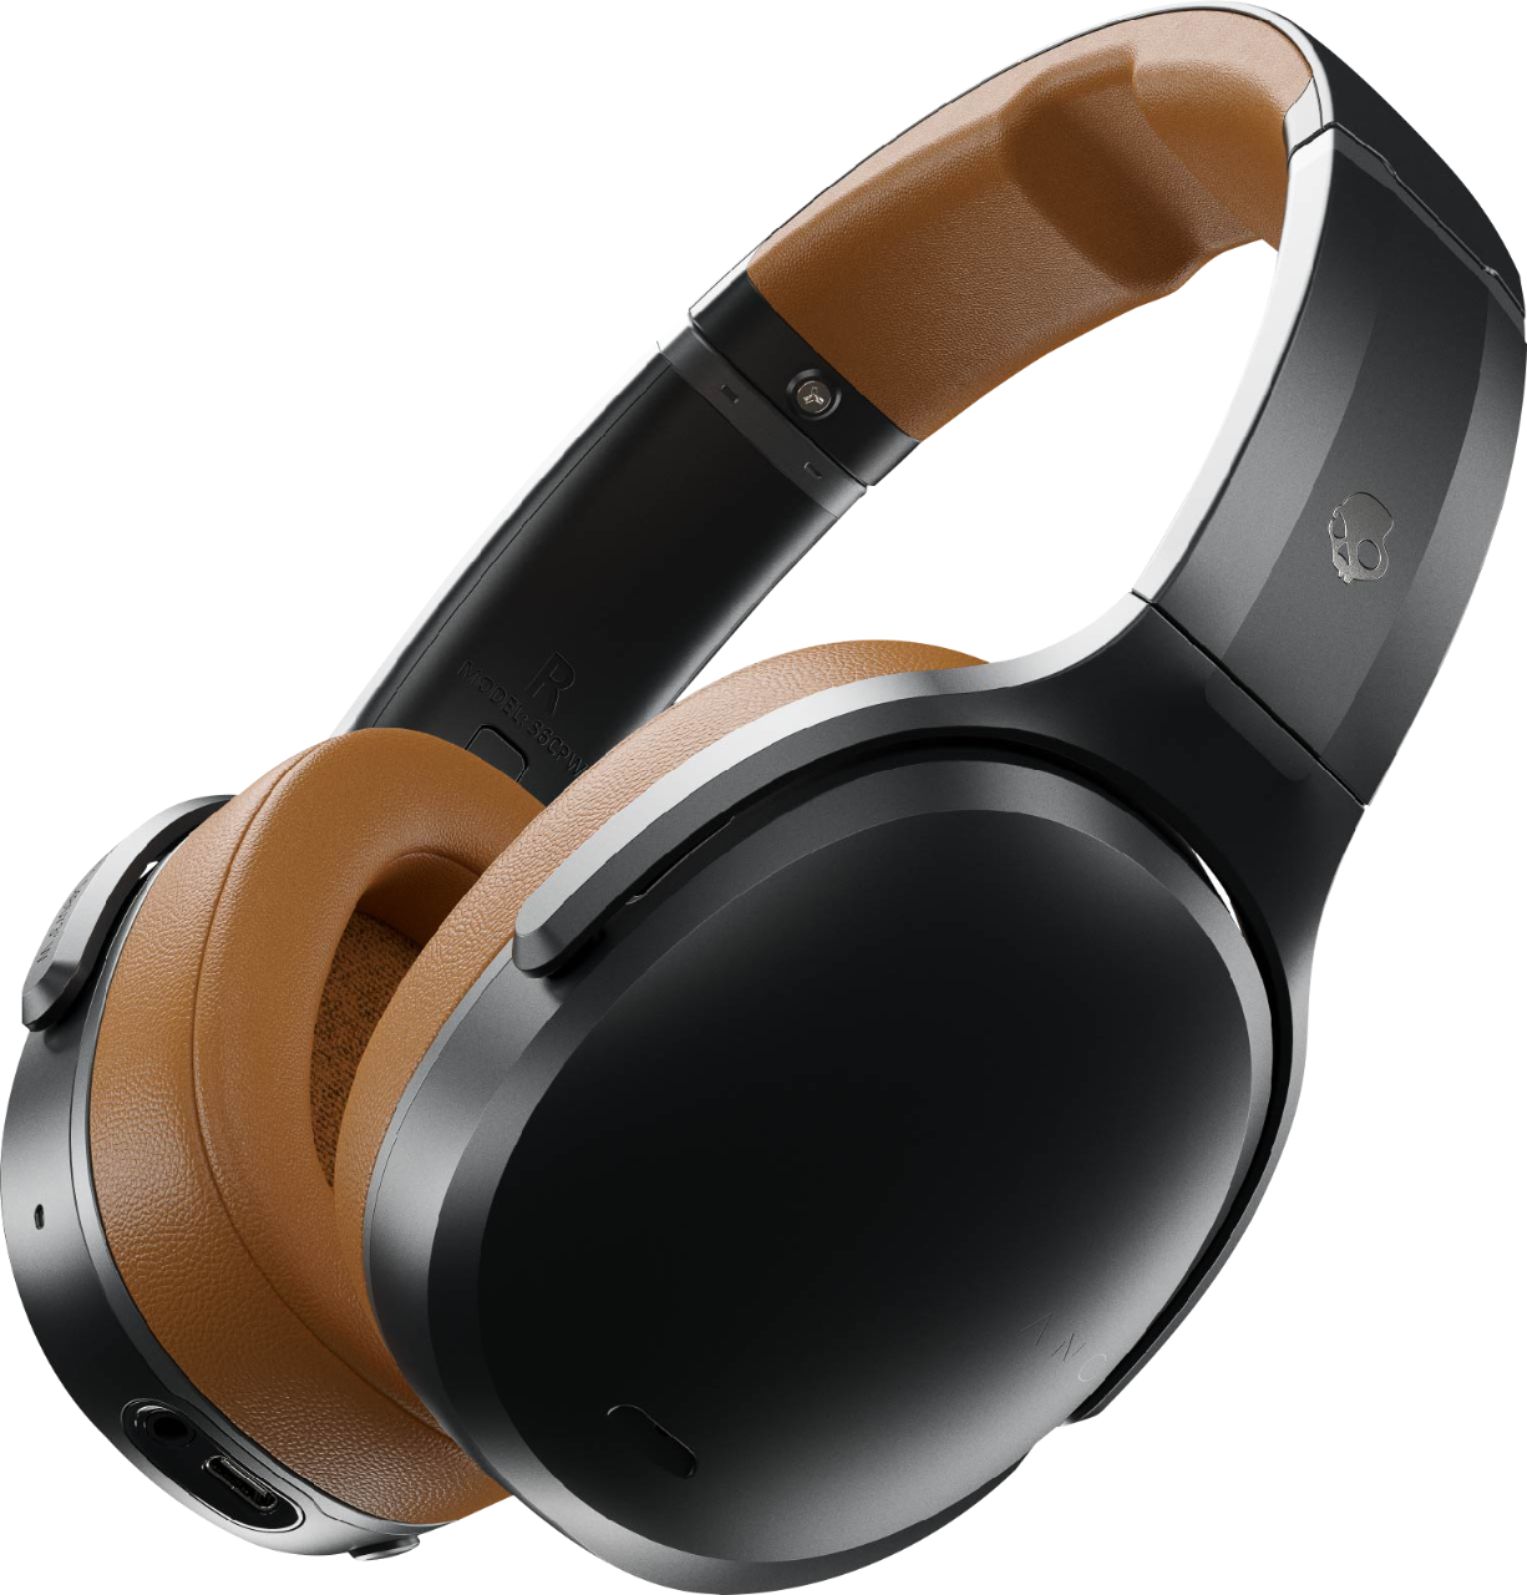 Angle View: Skullcandy - Crusher ANC Wireless Noise Cancelling Over-the-Ear Headphones - Black/Tan